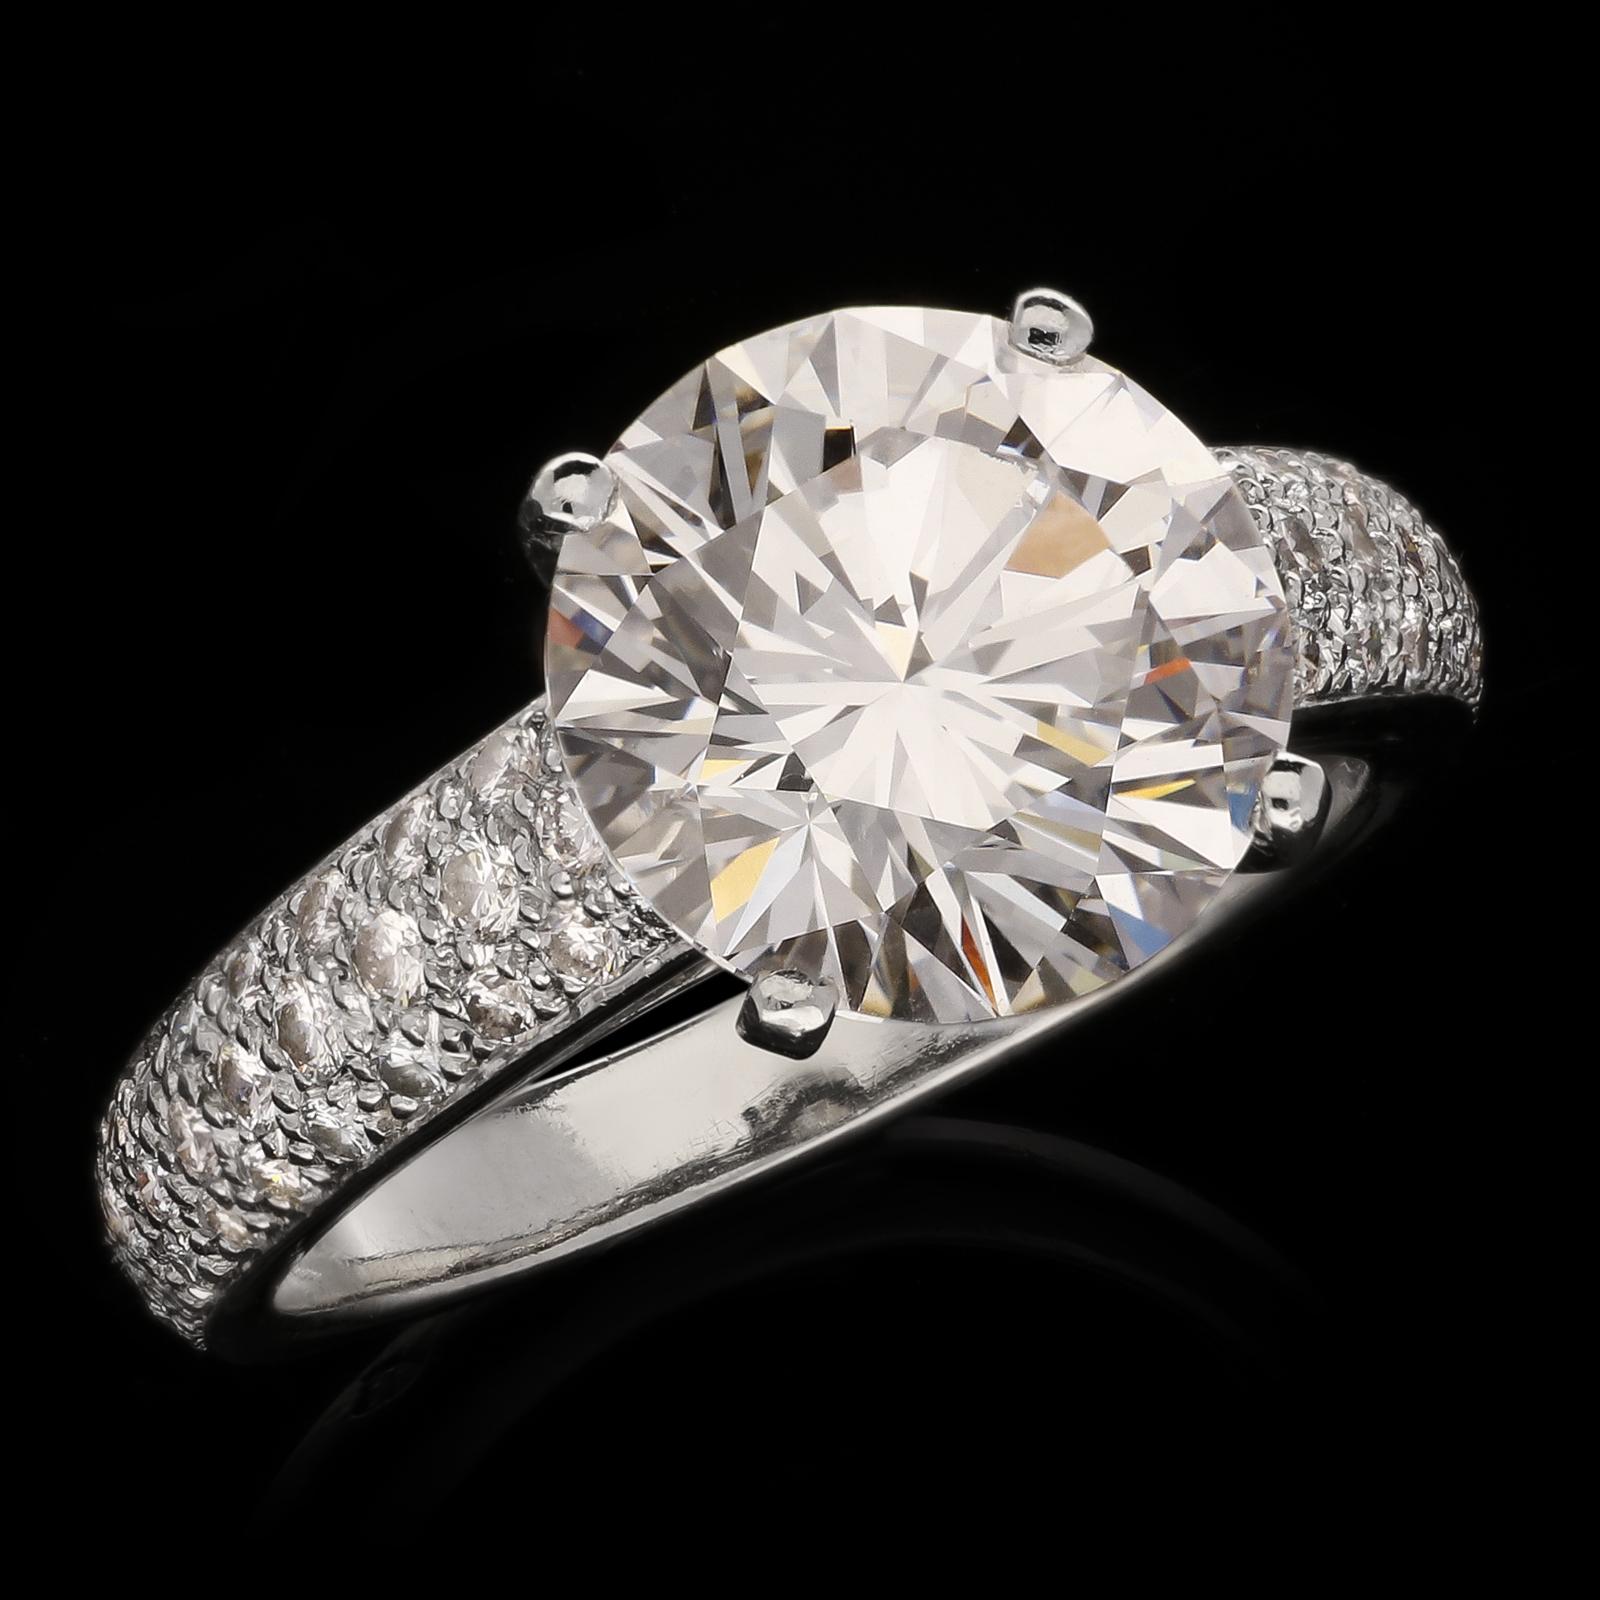 A beautiful solitaire diamond ring by Cartier circa 2000s, set to the centre with a round brilliant diamond weighing 4.17cts and of D colour, VVS2 clarity and Type IIA classification, four claw set in platinum between tapering shoulders pavé set